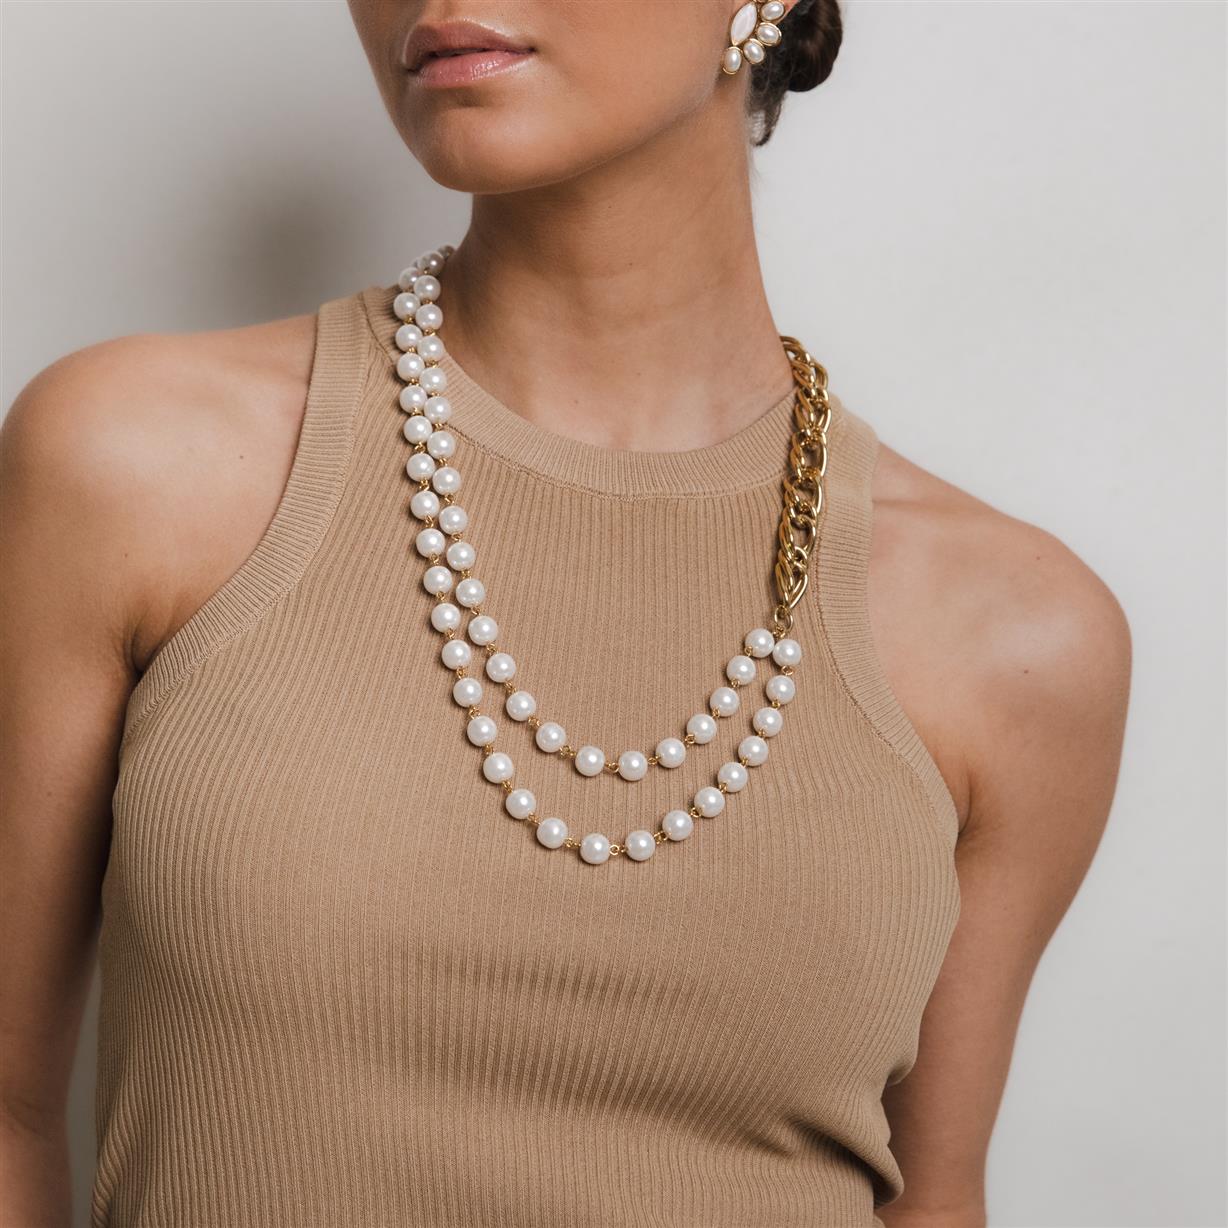 Small chain & pearls necklace